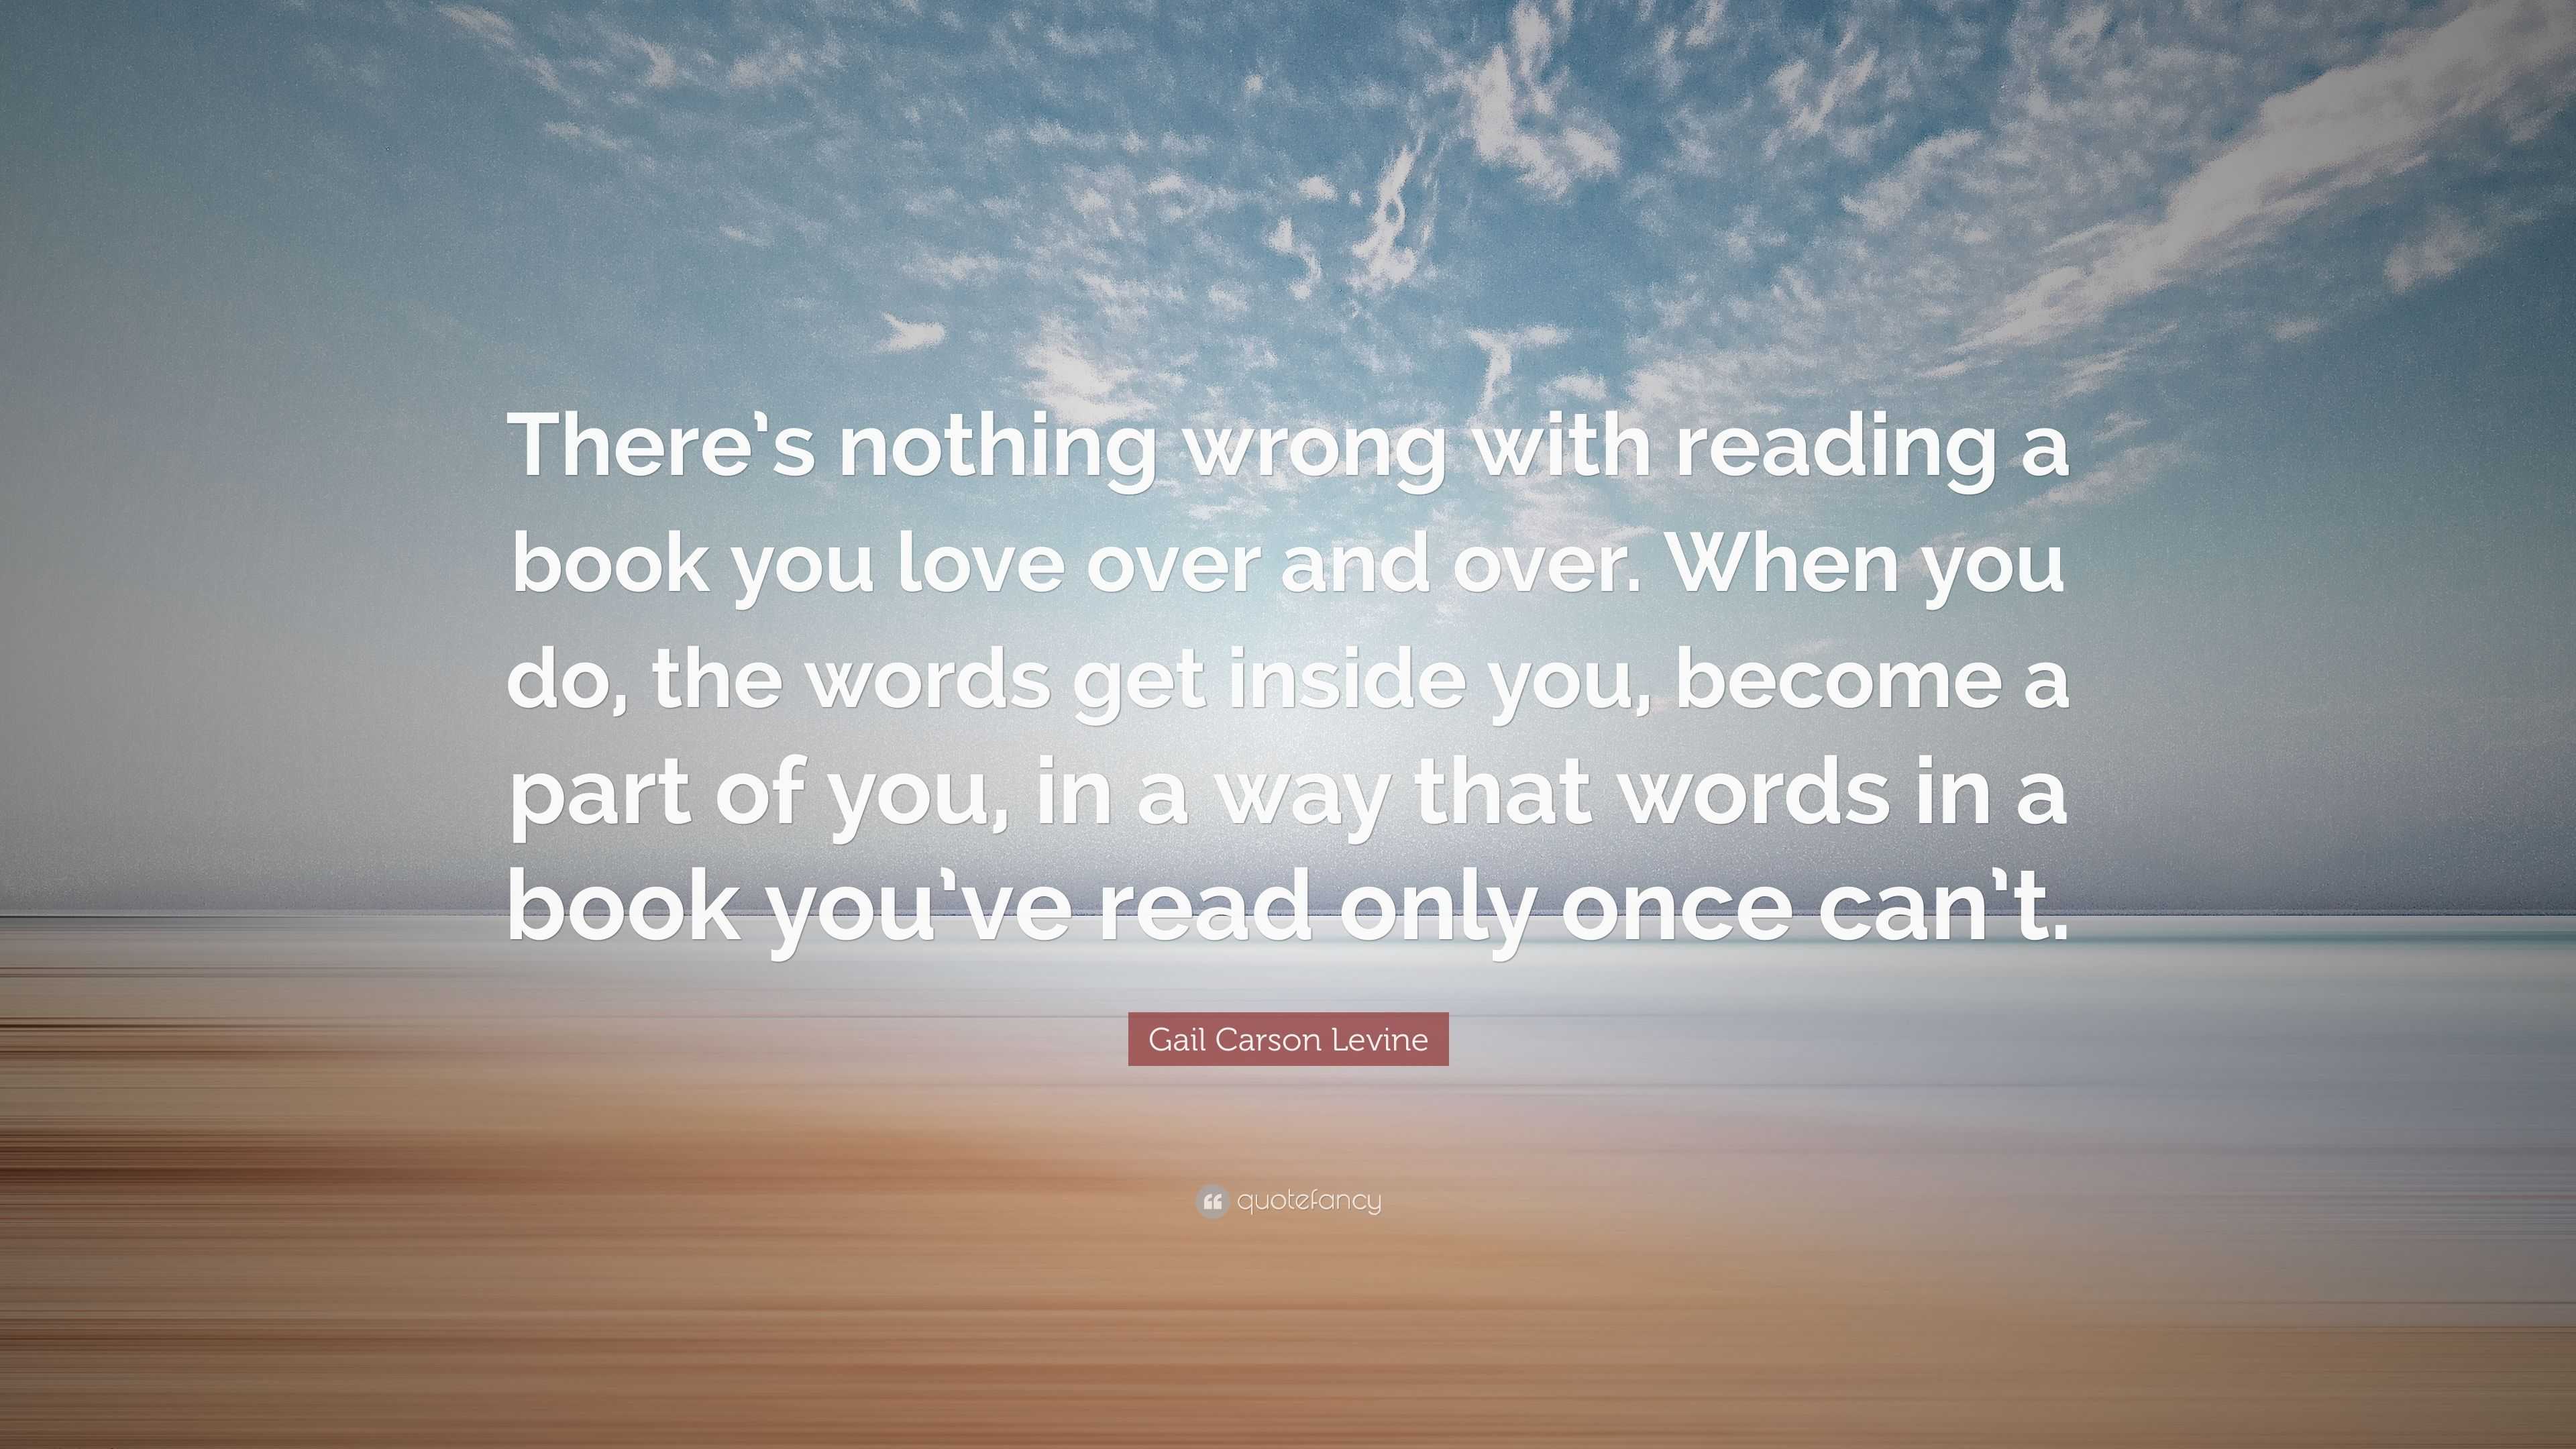 Gail Carson Levine Quote: “There’s nothing wrong with reading a book ...